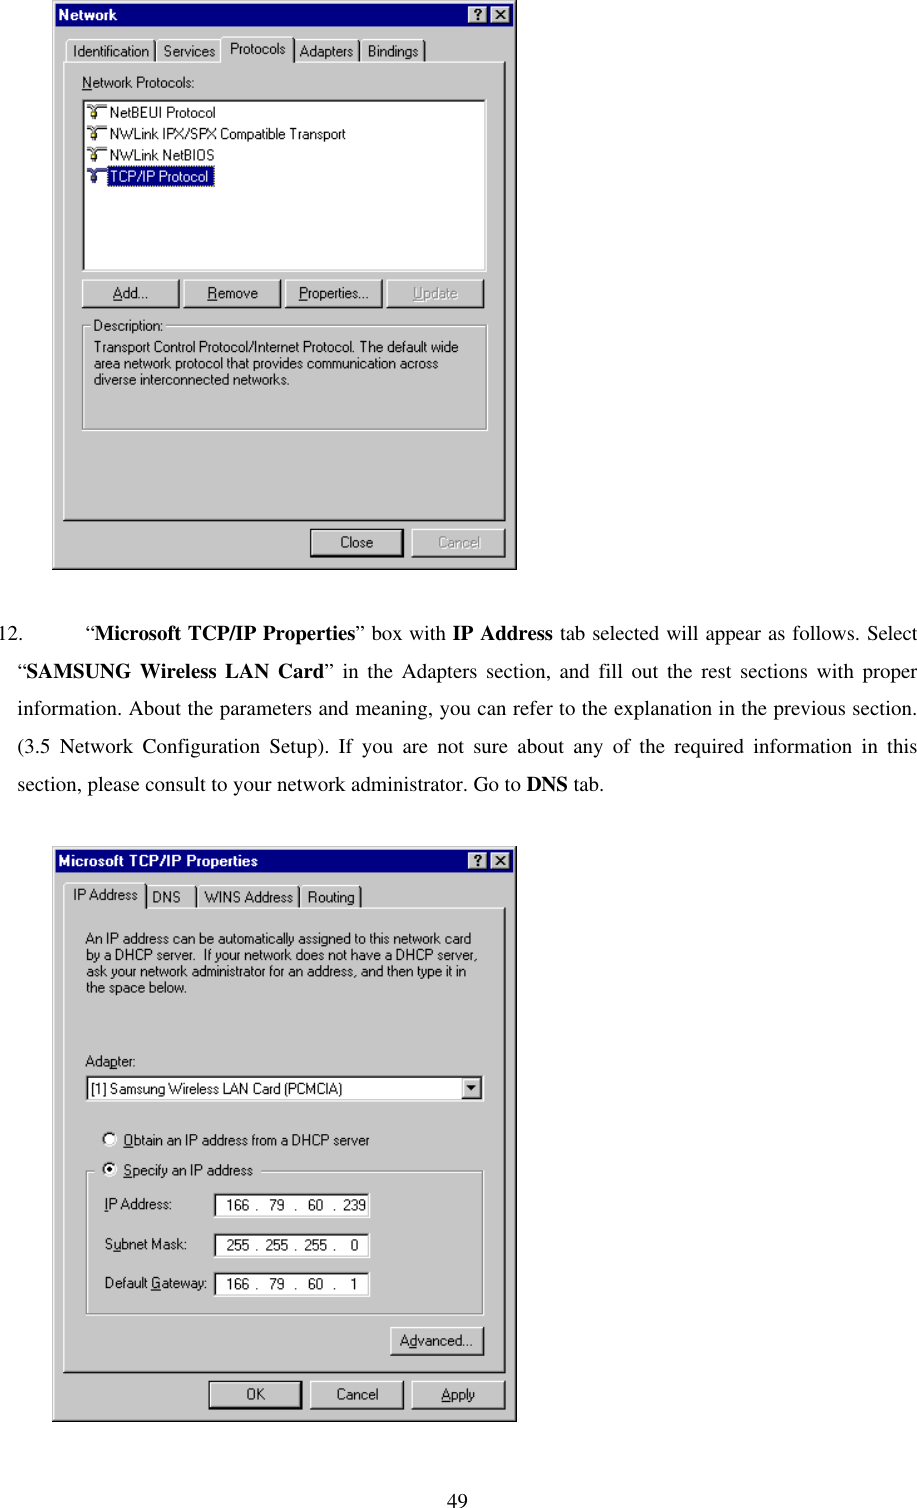 49          12. “Microsoft TCP/IP Properties” box with IP Address tab selected will appear as follows. Select“SAMSUNG Wireless LAN Card” in the Adapters section, and fill out the rest sections with properinformation. About the parameters and meaning, you can refer to the explanation in the previous section.(3.5 Network Configuration Setup). If you are not sure about any of the required information in thissection, please consult to your network administrator. Go to DNS tab.          